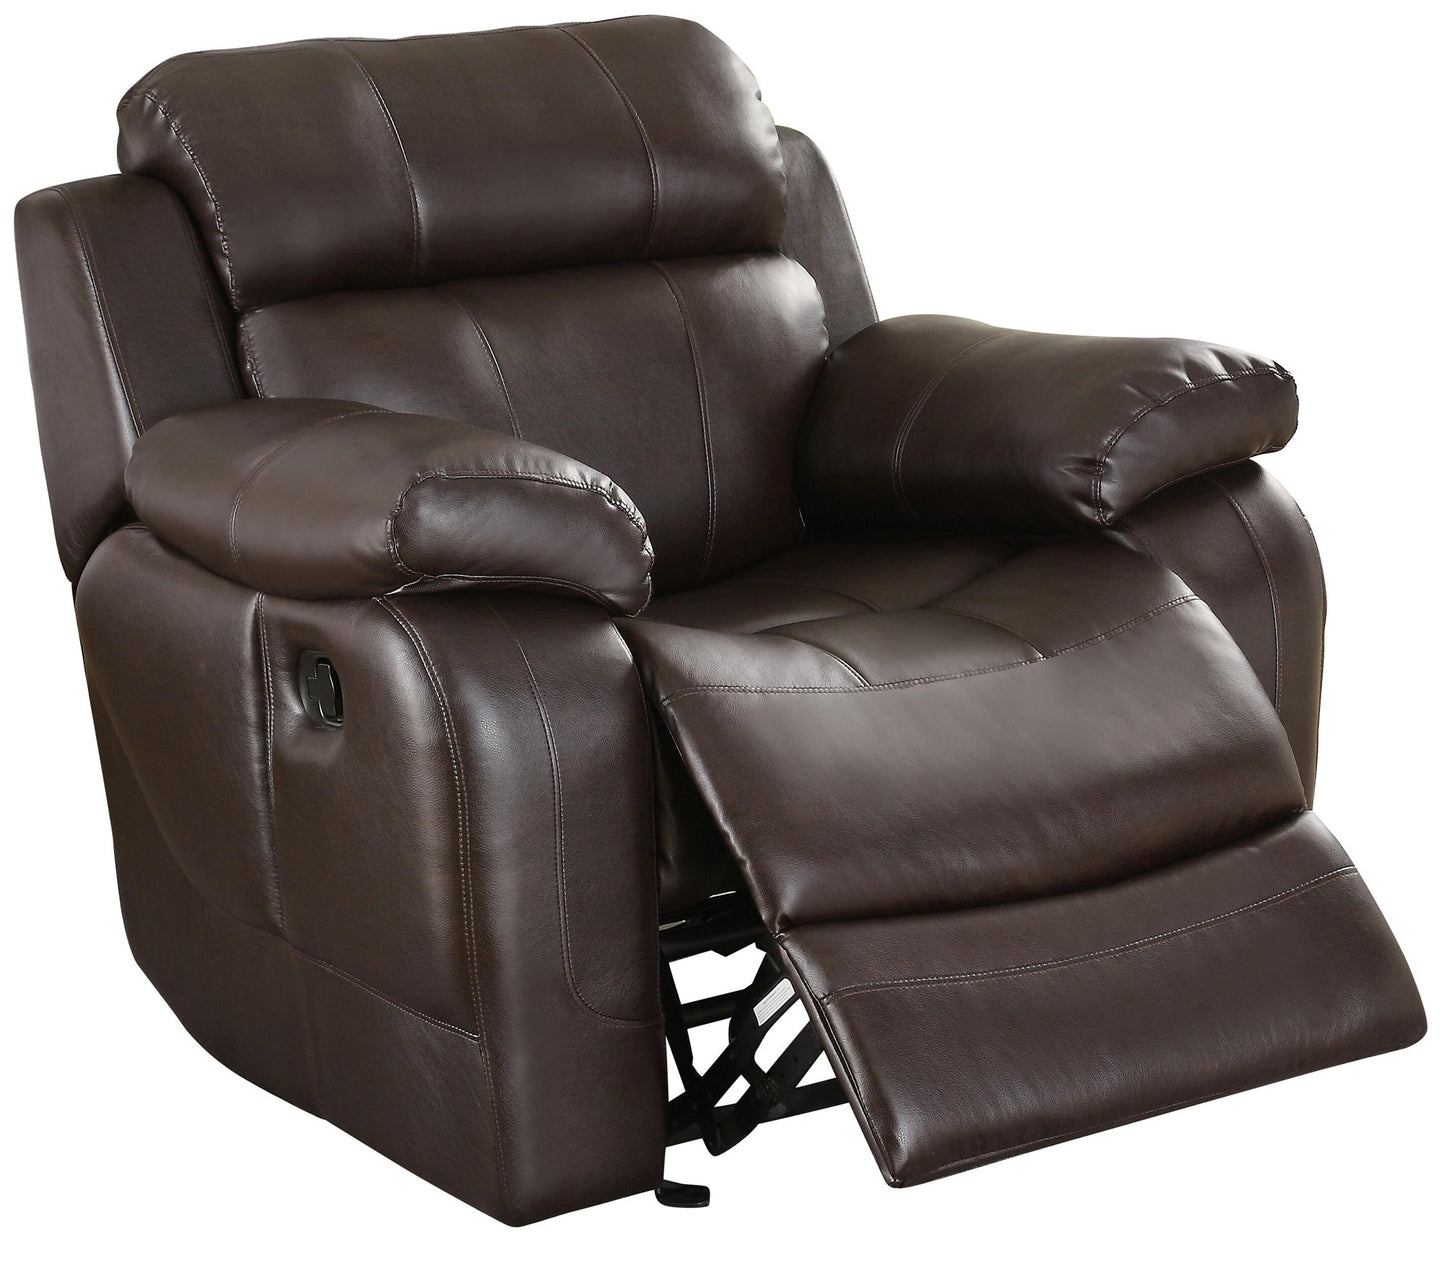 Homelegance Marille3PC Set Double Reclining Sofa, Love Seat with Console & Glider Recliner Chair in Leather - Dark Brown